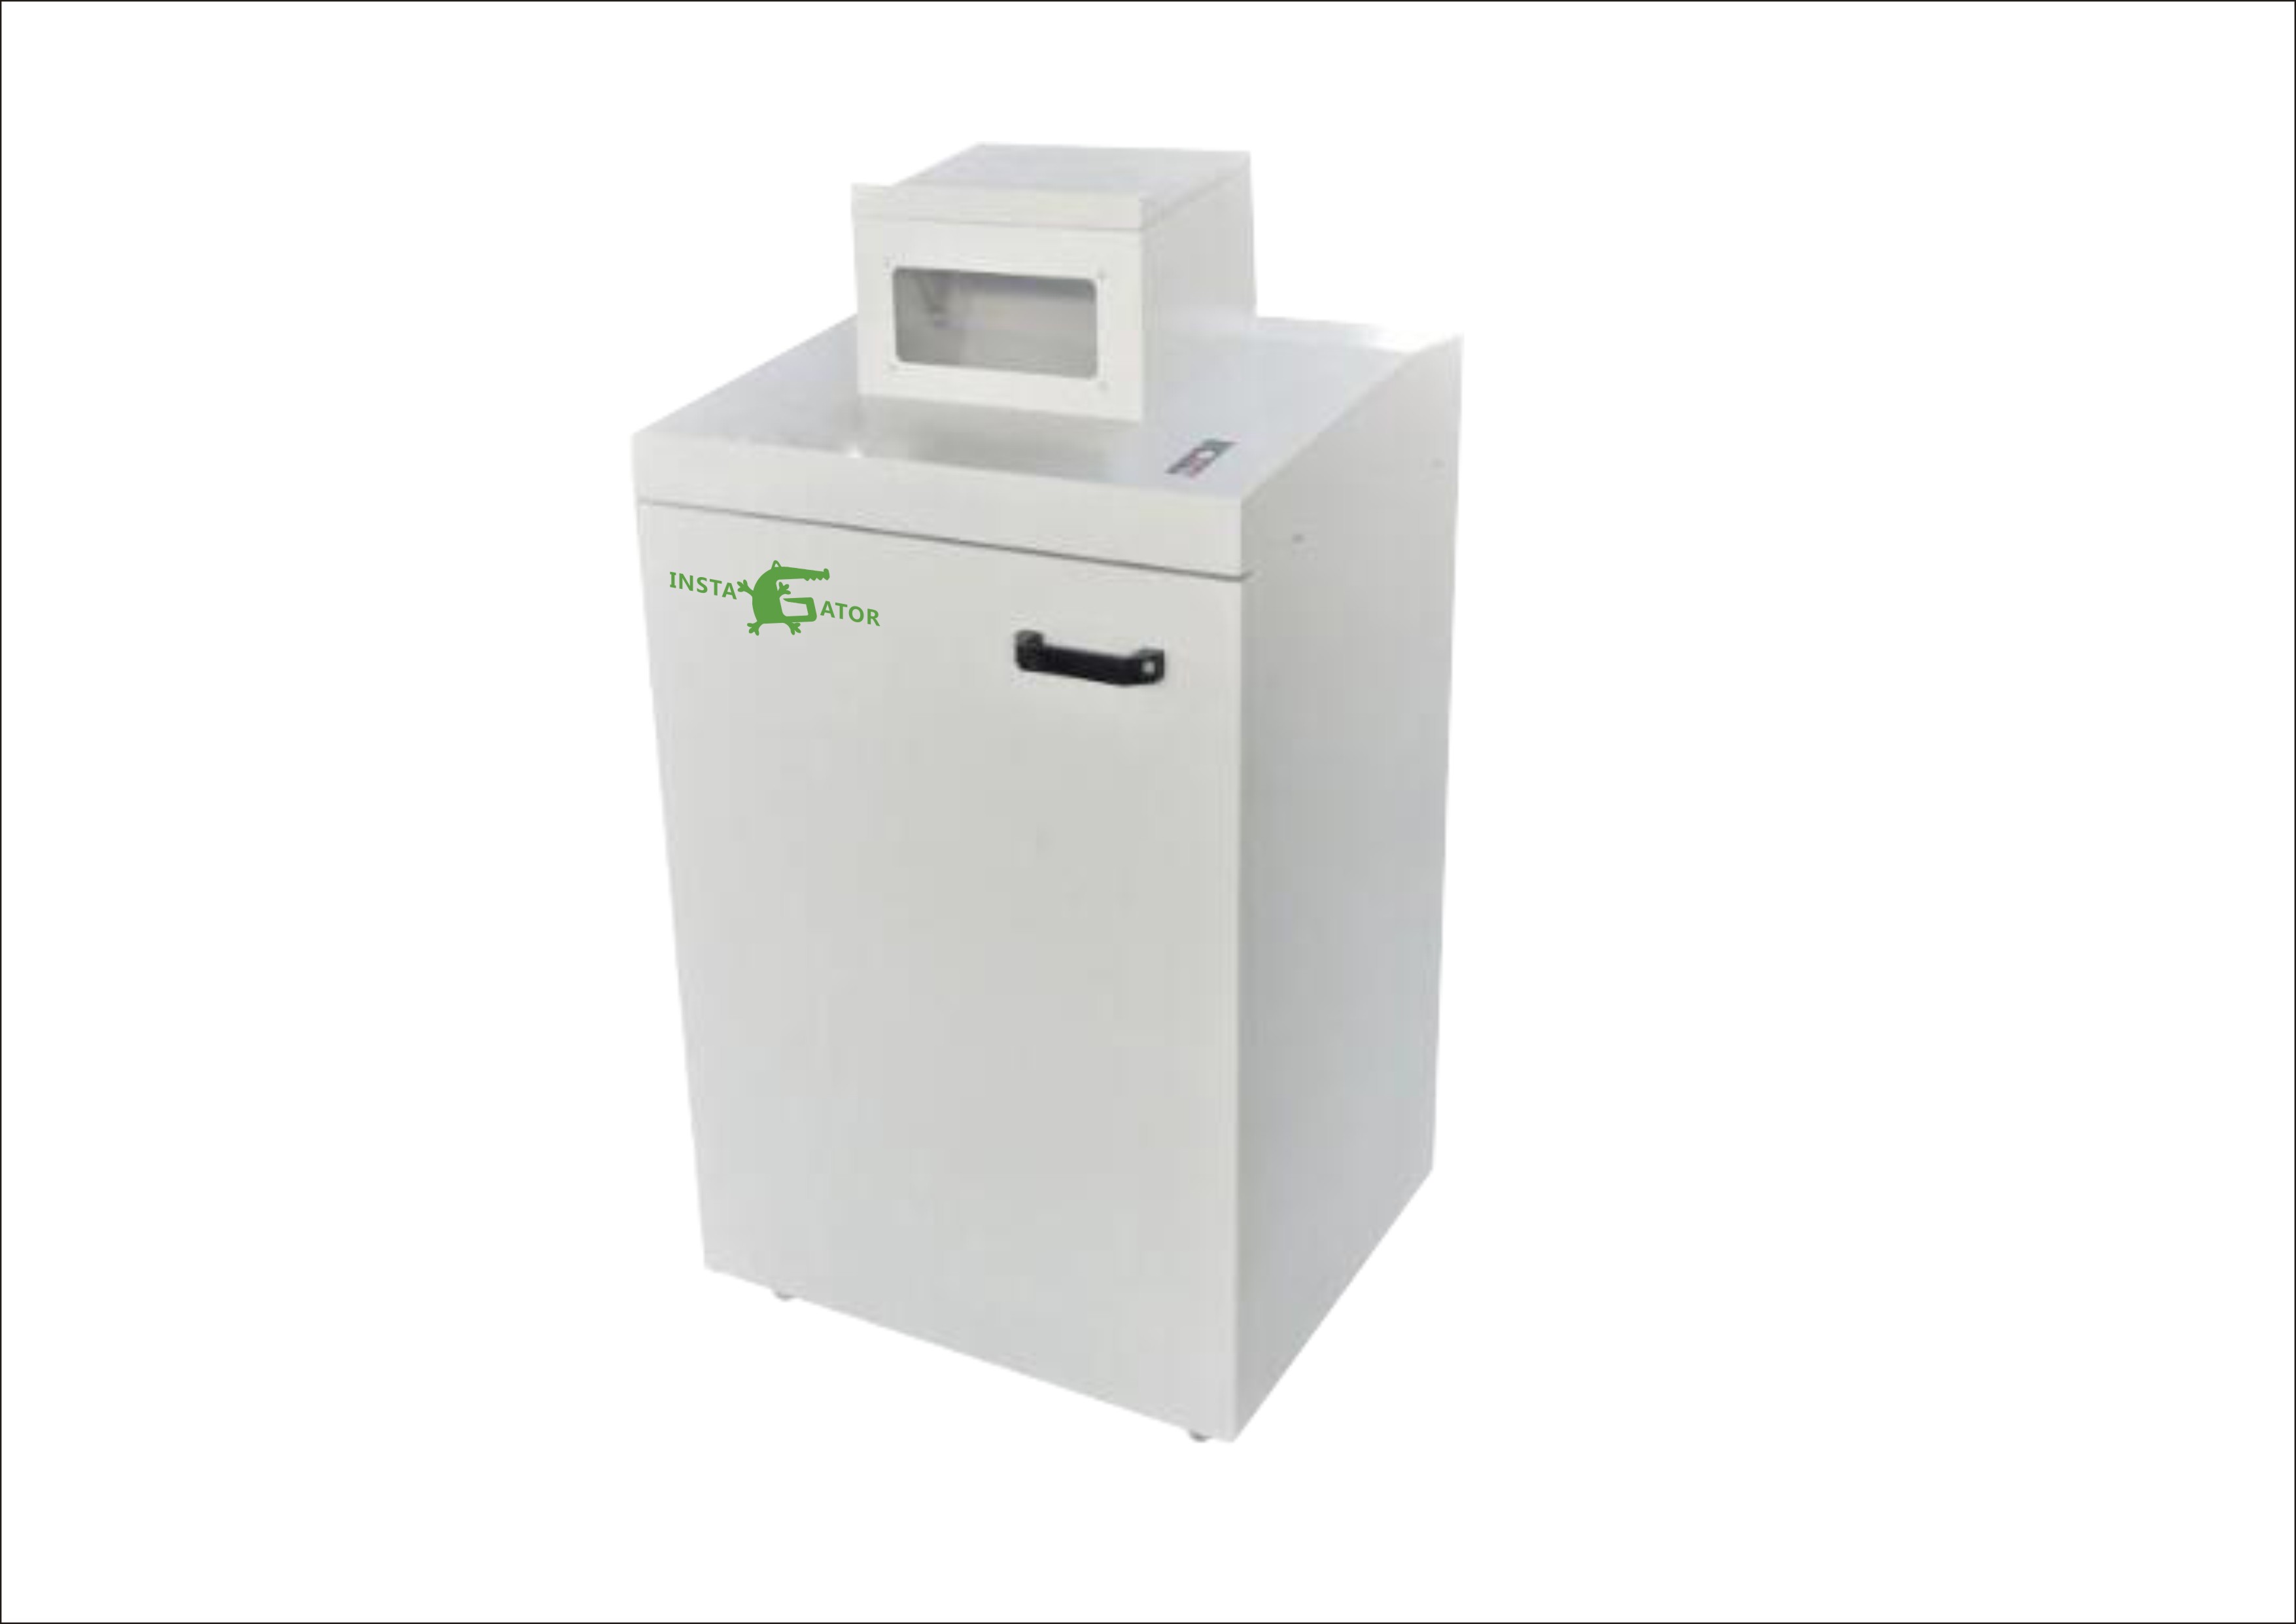 New Paper Shredder SP1001A is Coming 